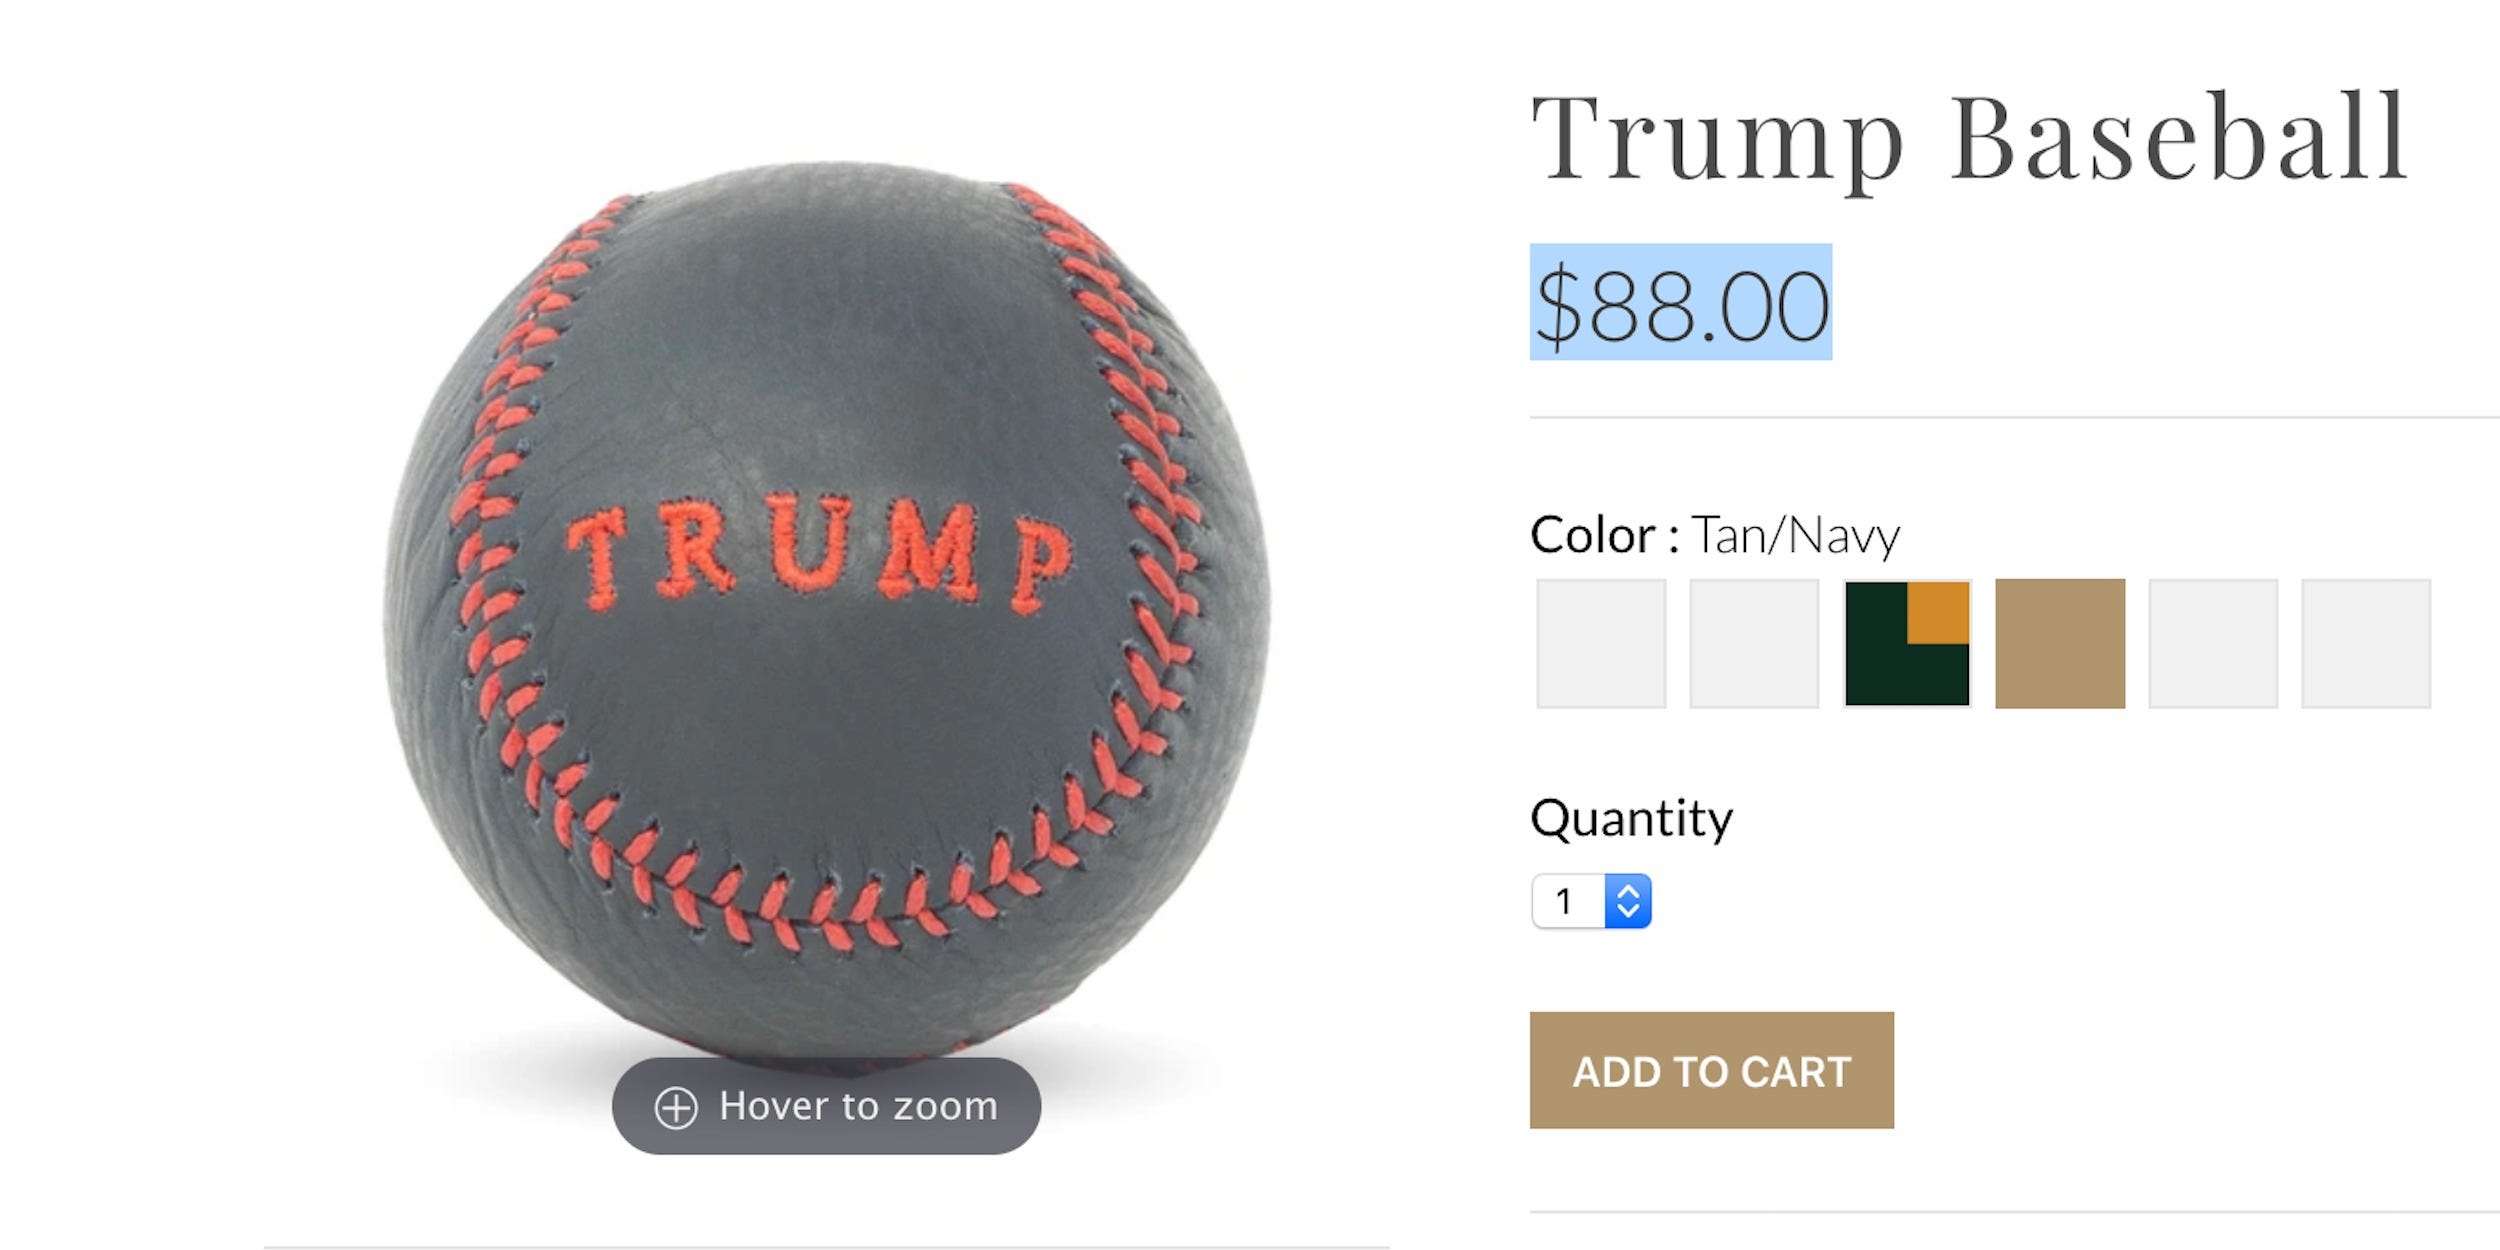 people-are-concerned-that-an-88-baseball-sold-on-the-trump-organizations-merch-page-could-be-a-secret-message-to-white-supremacists.jpg